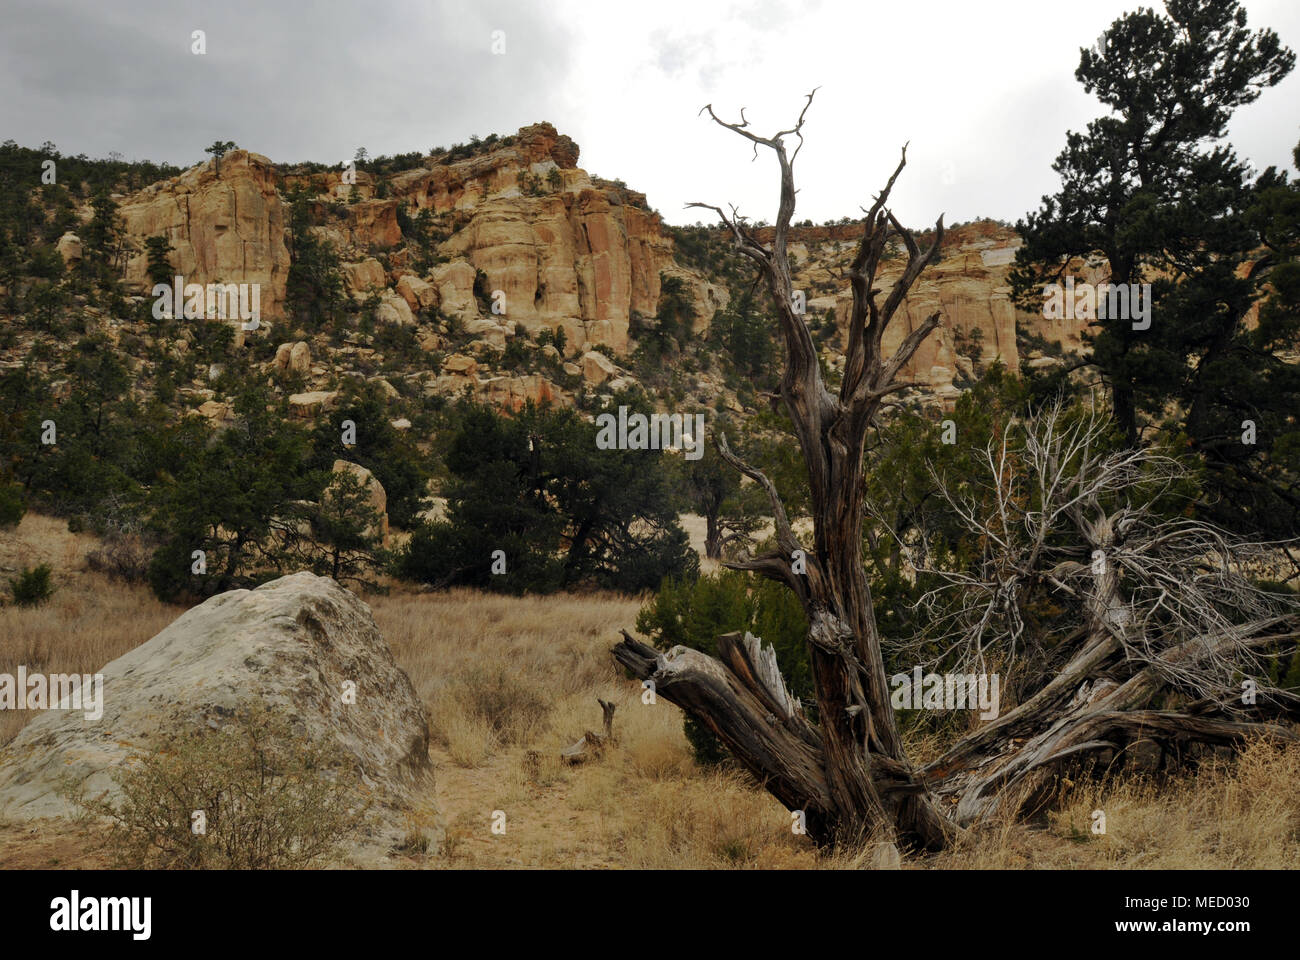 Sandstone cliffs rise above a landscape dotted with shrubs and trees in the El Malpais National Conservation Area south of Grants, New Mexico. Stock Photo